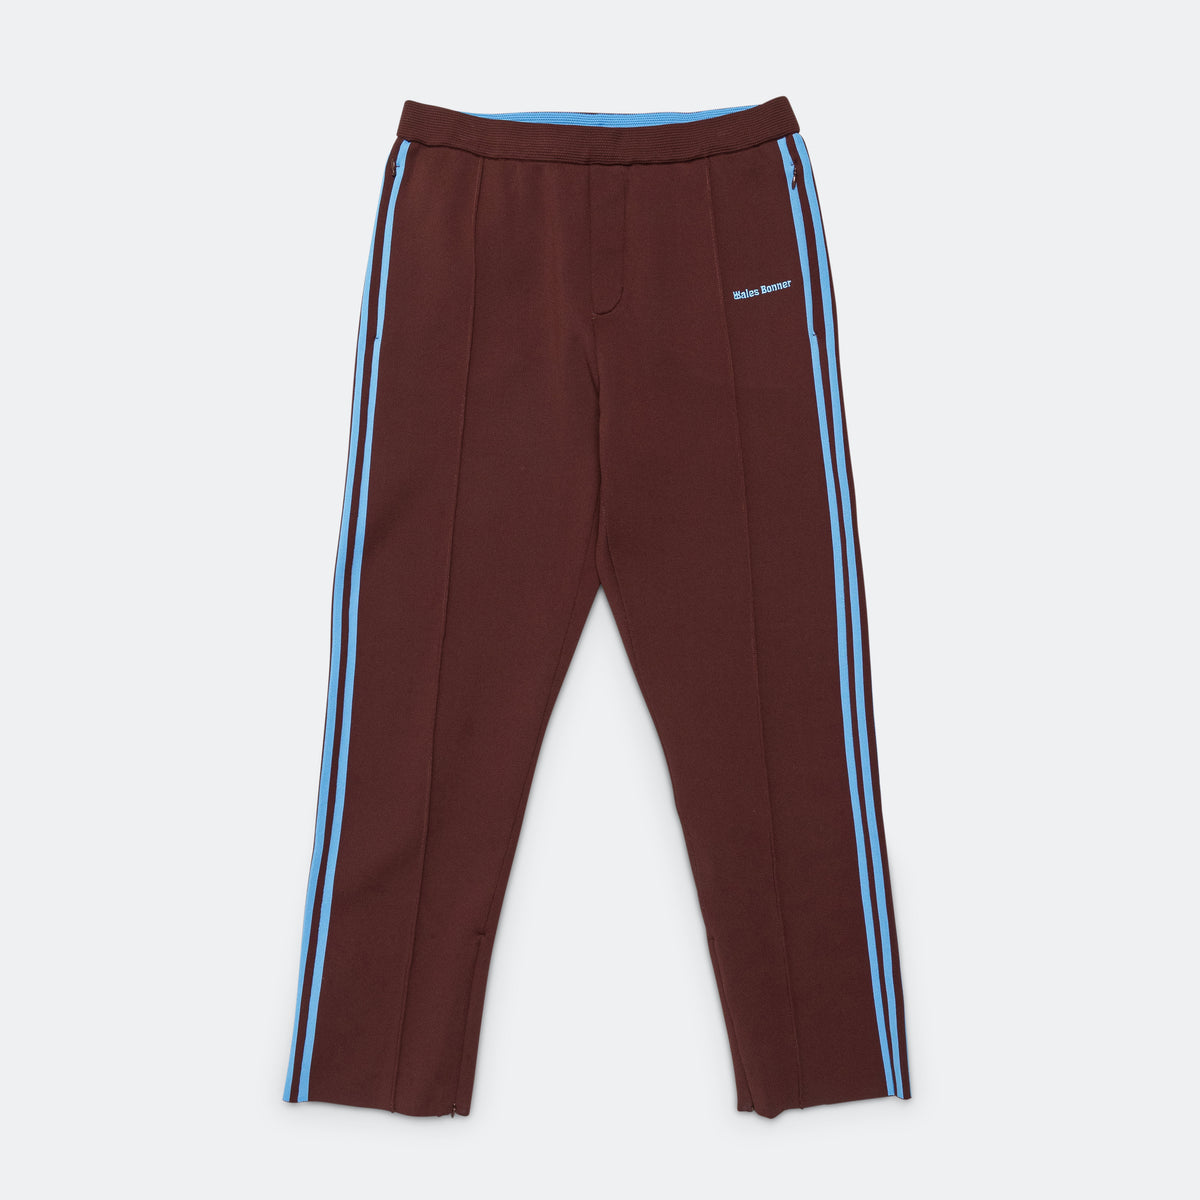 adidas Knit Trackpant × Wales Bonner - Mystery Brown | UP THERE